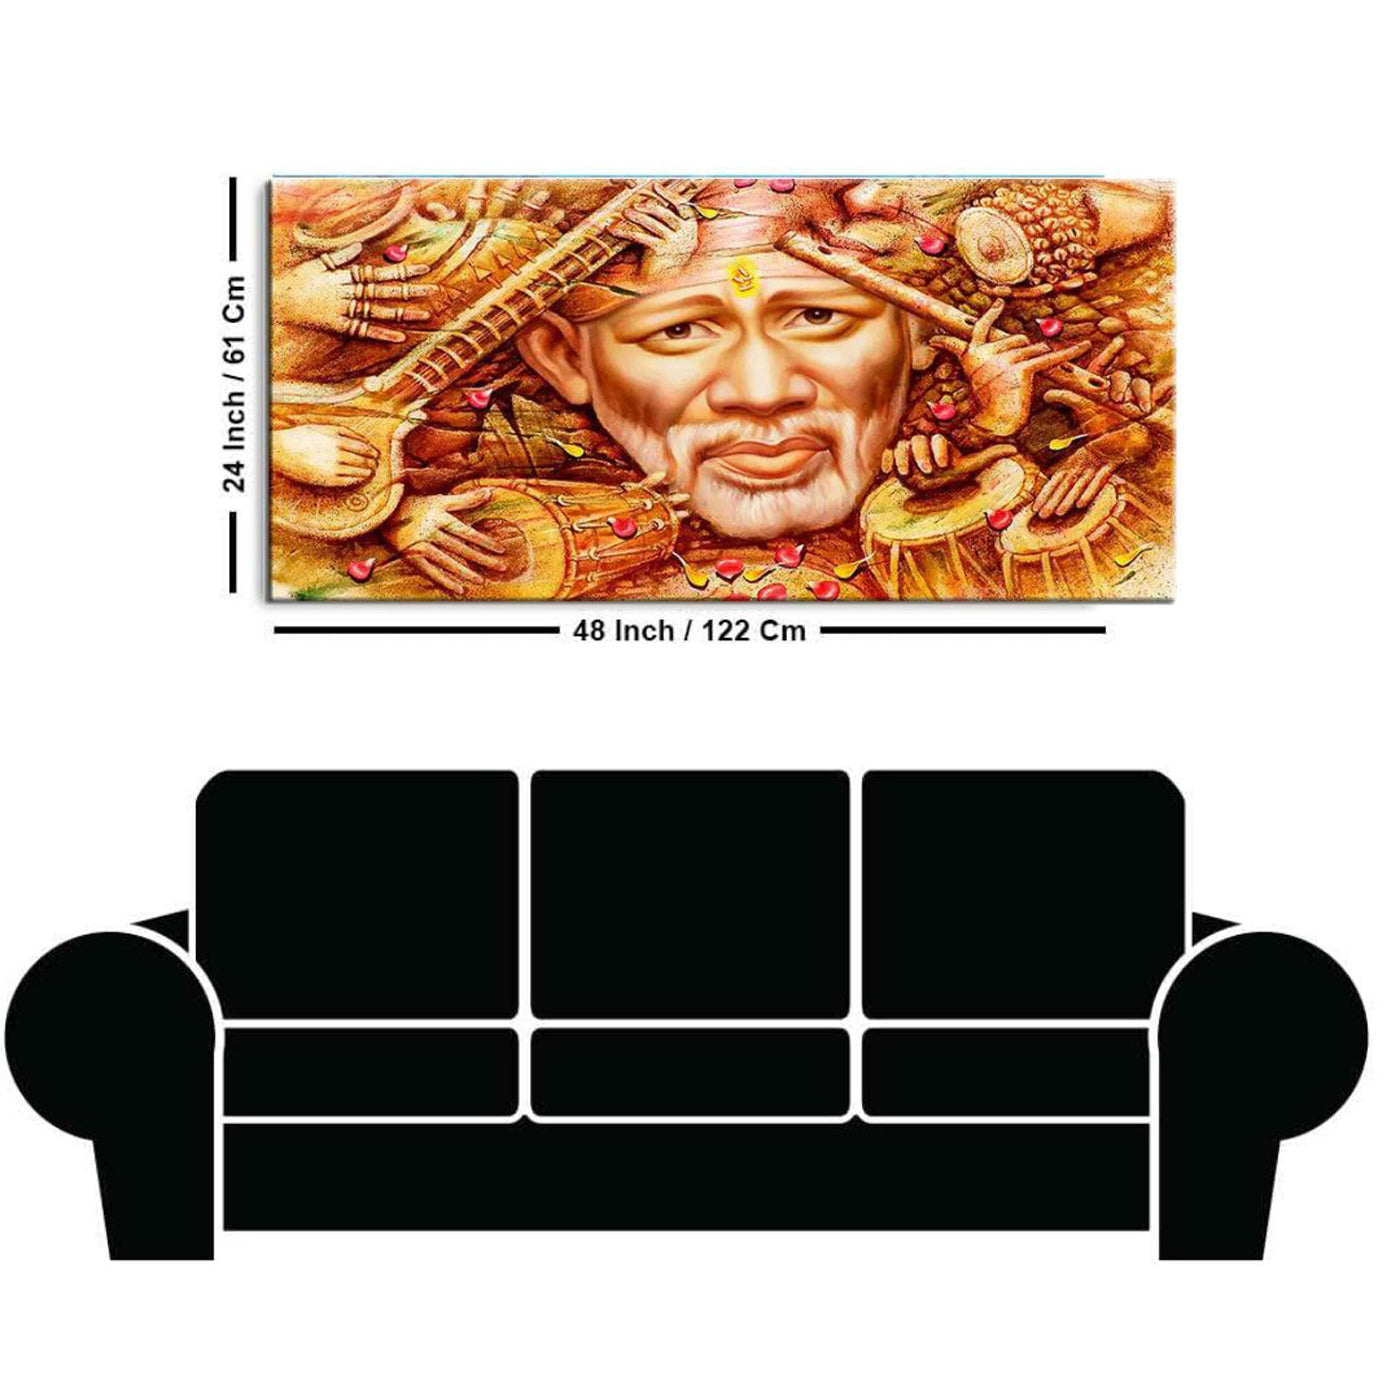 This Sai Baba Spiritual wall hanging is high definition picture photo prints on canvas